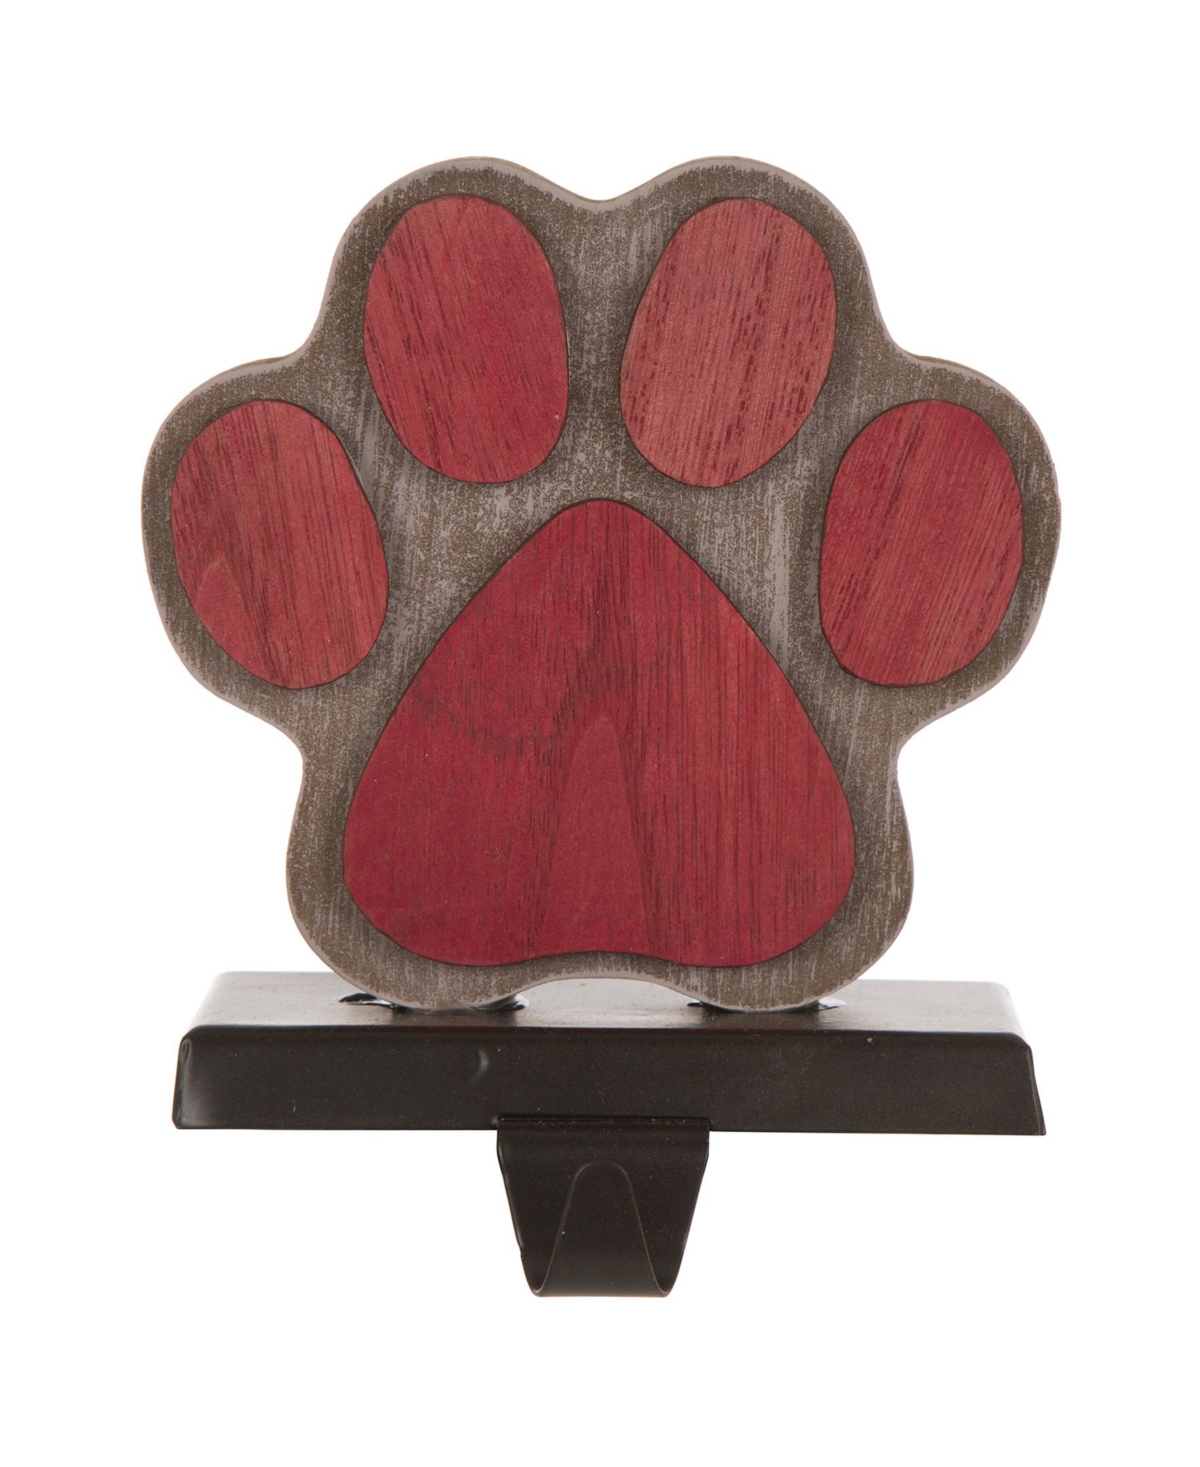 6.30" H Wooden Paw Stocking Holder - Red